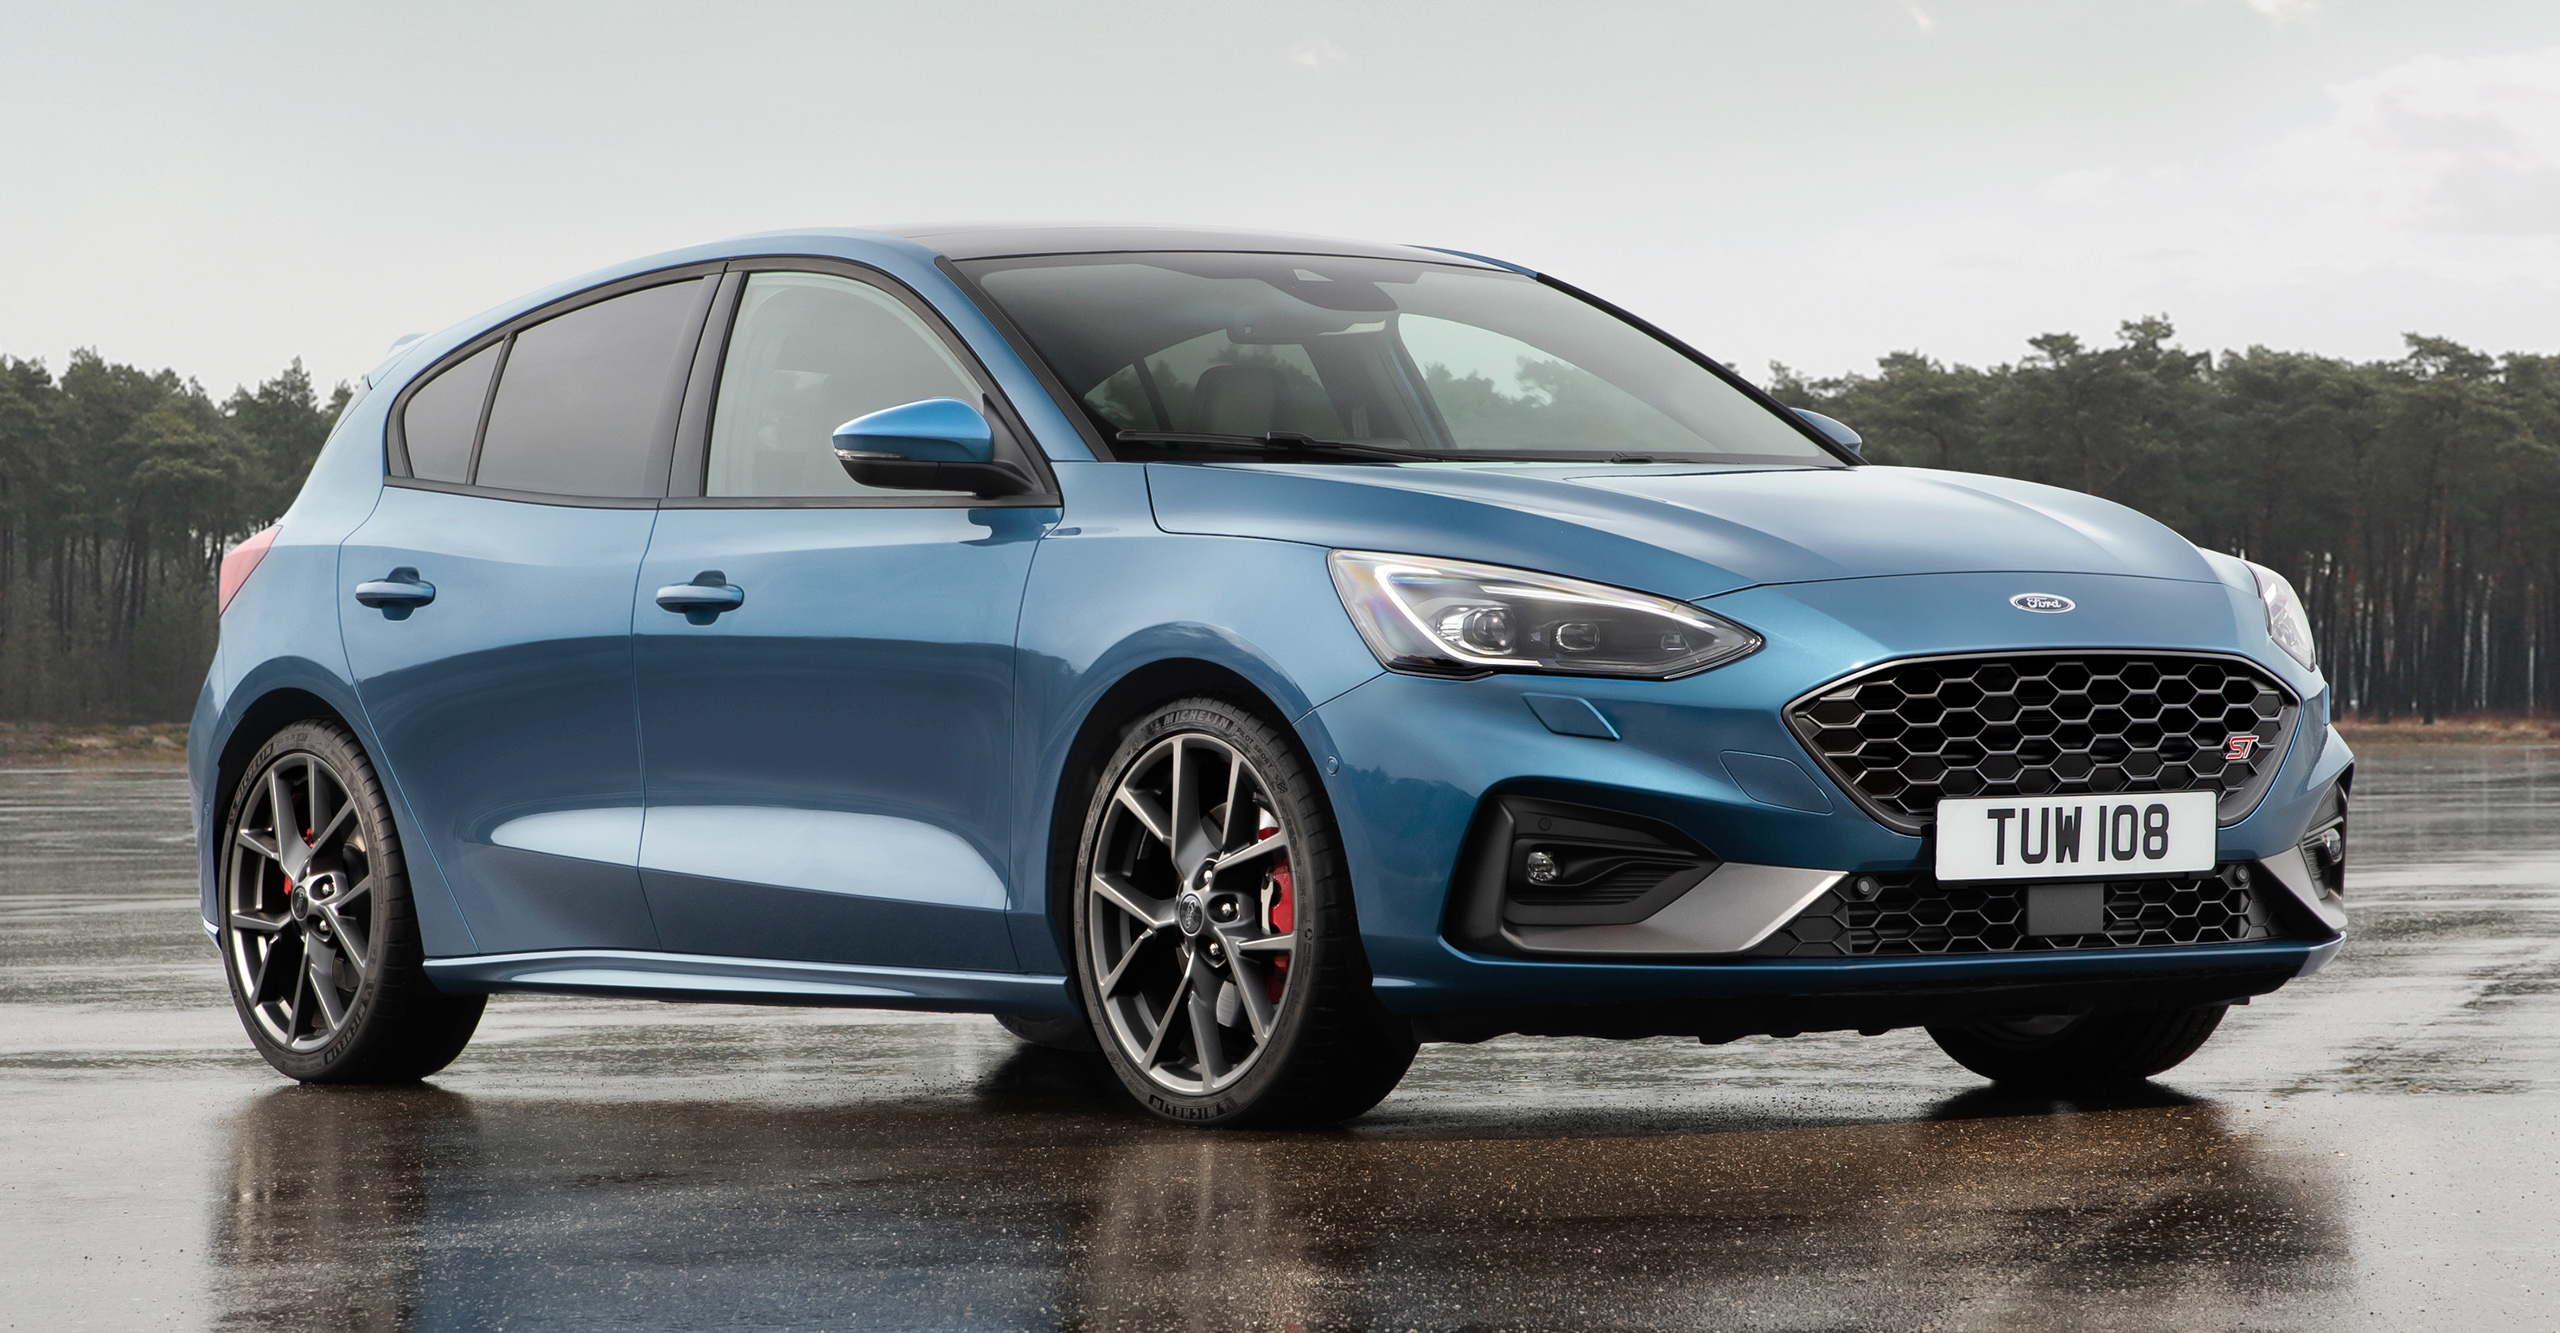 2019 Ford Focus ST Mk4 debuts - 276 hp and 430 Nm 2.3 litre turbo